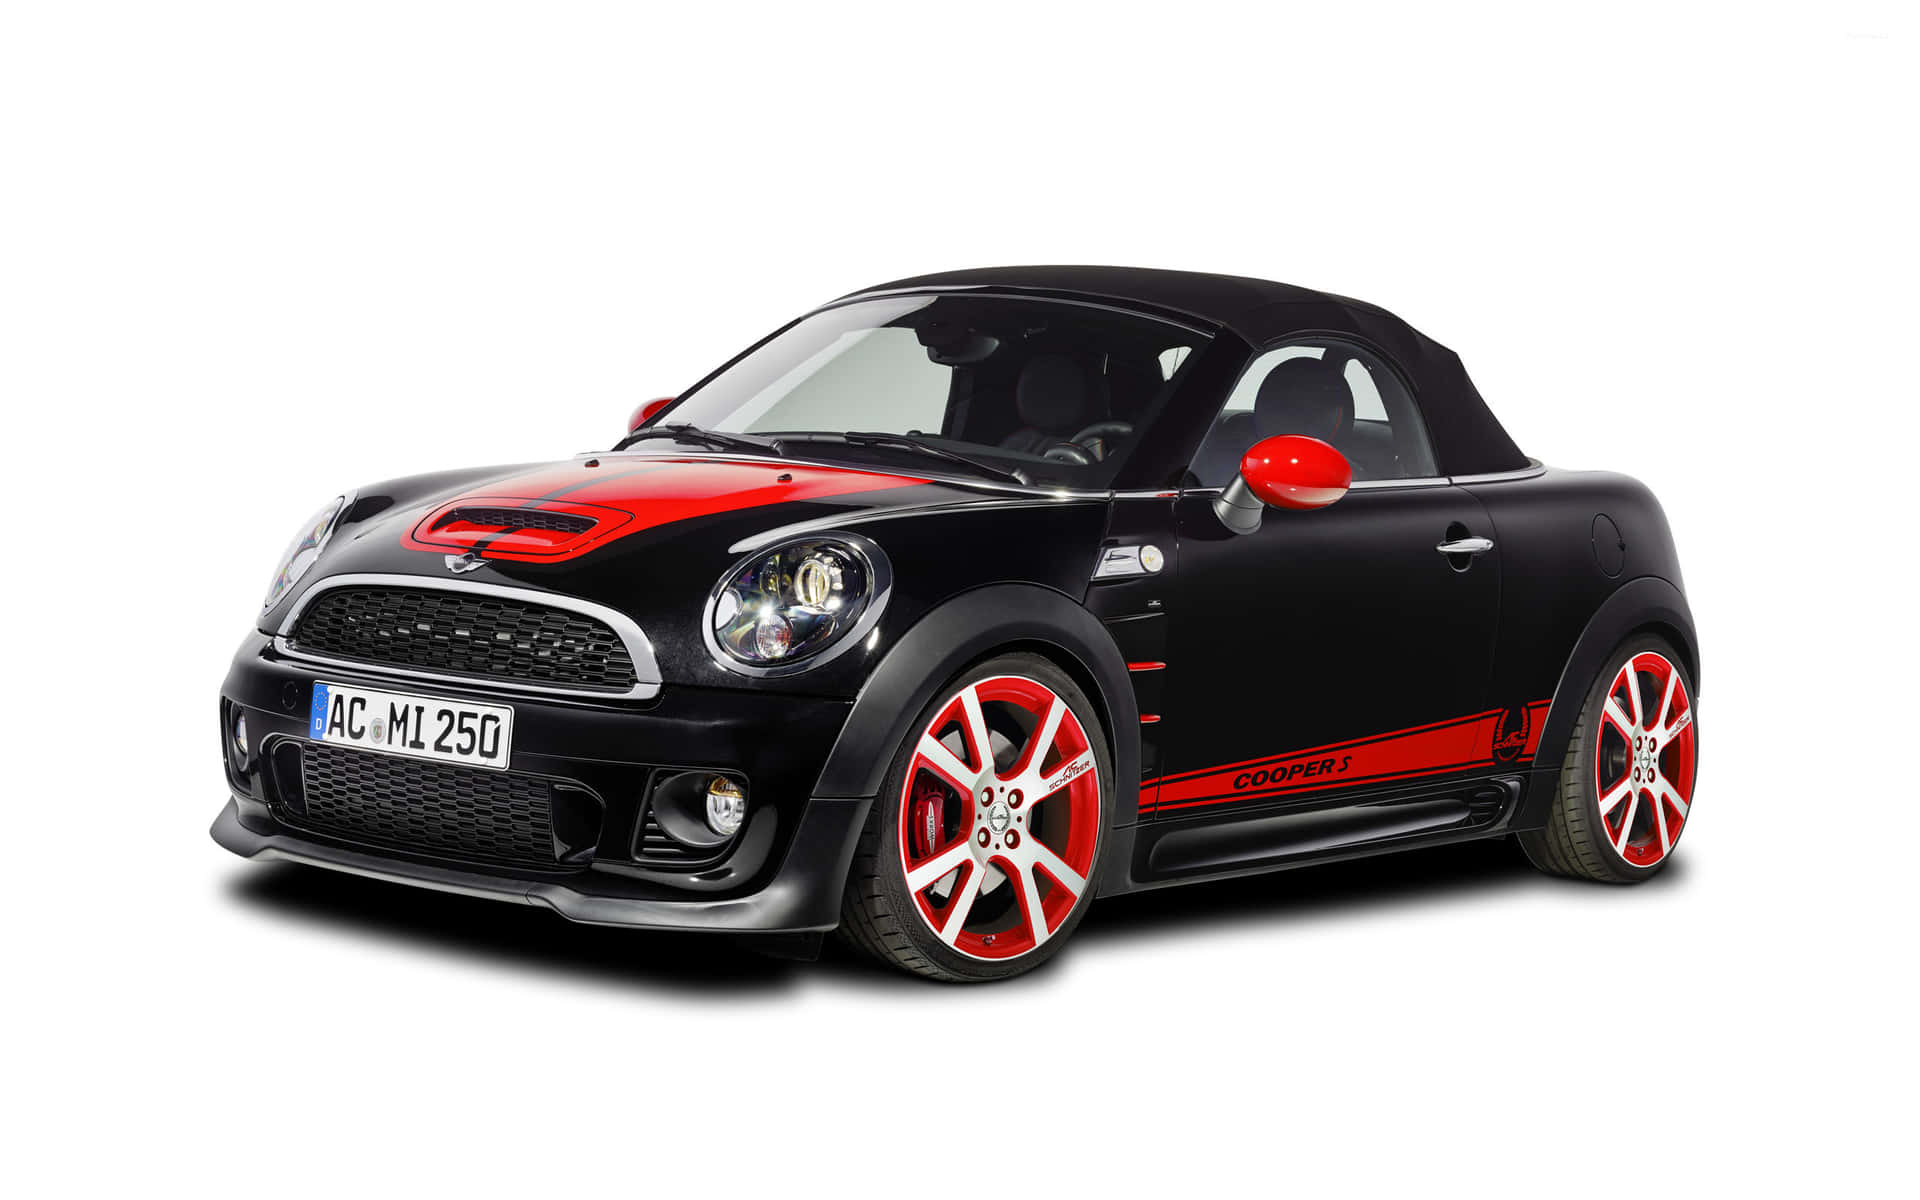 Captivating Mini Roadster In Motion Wallpaper